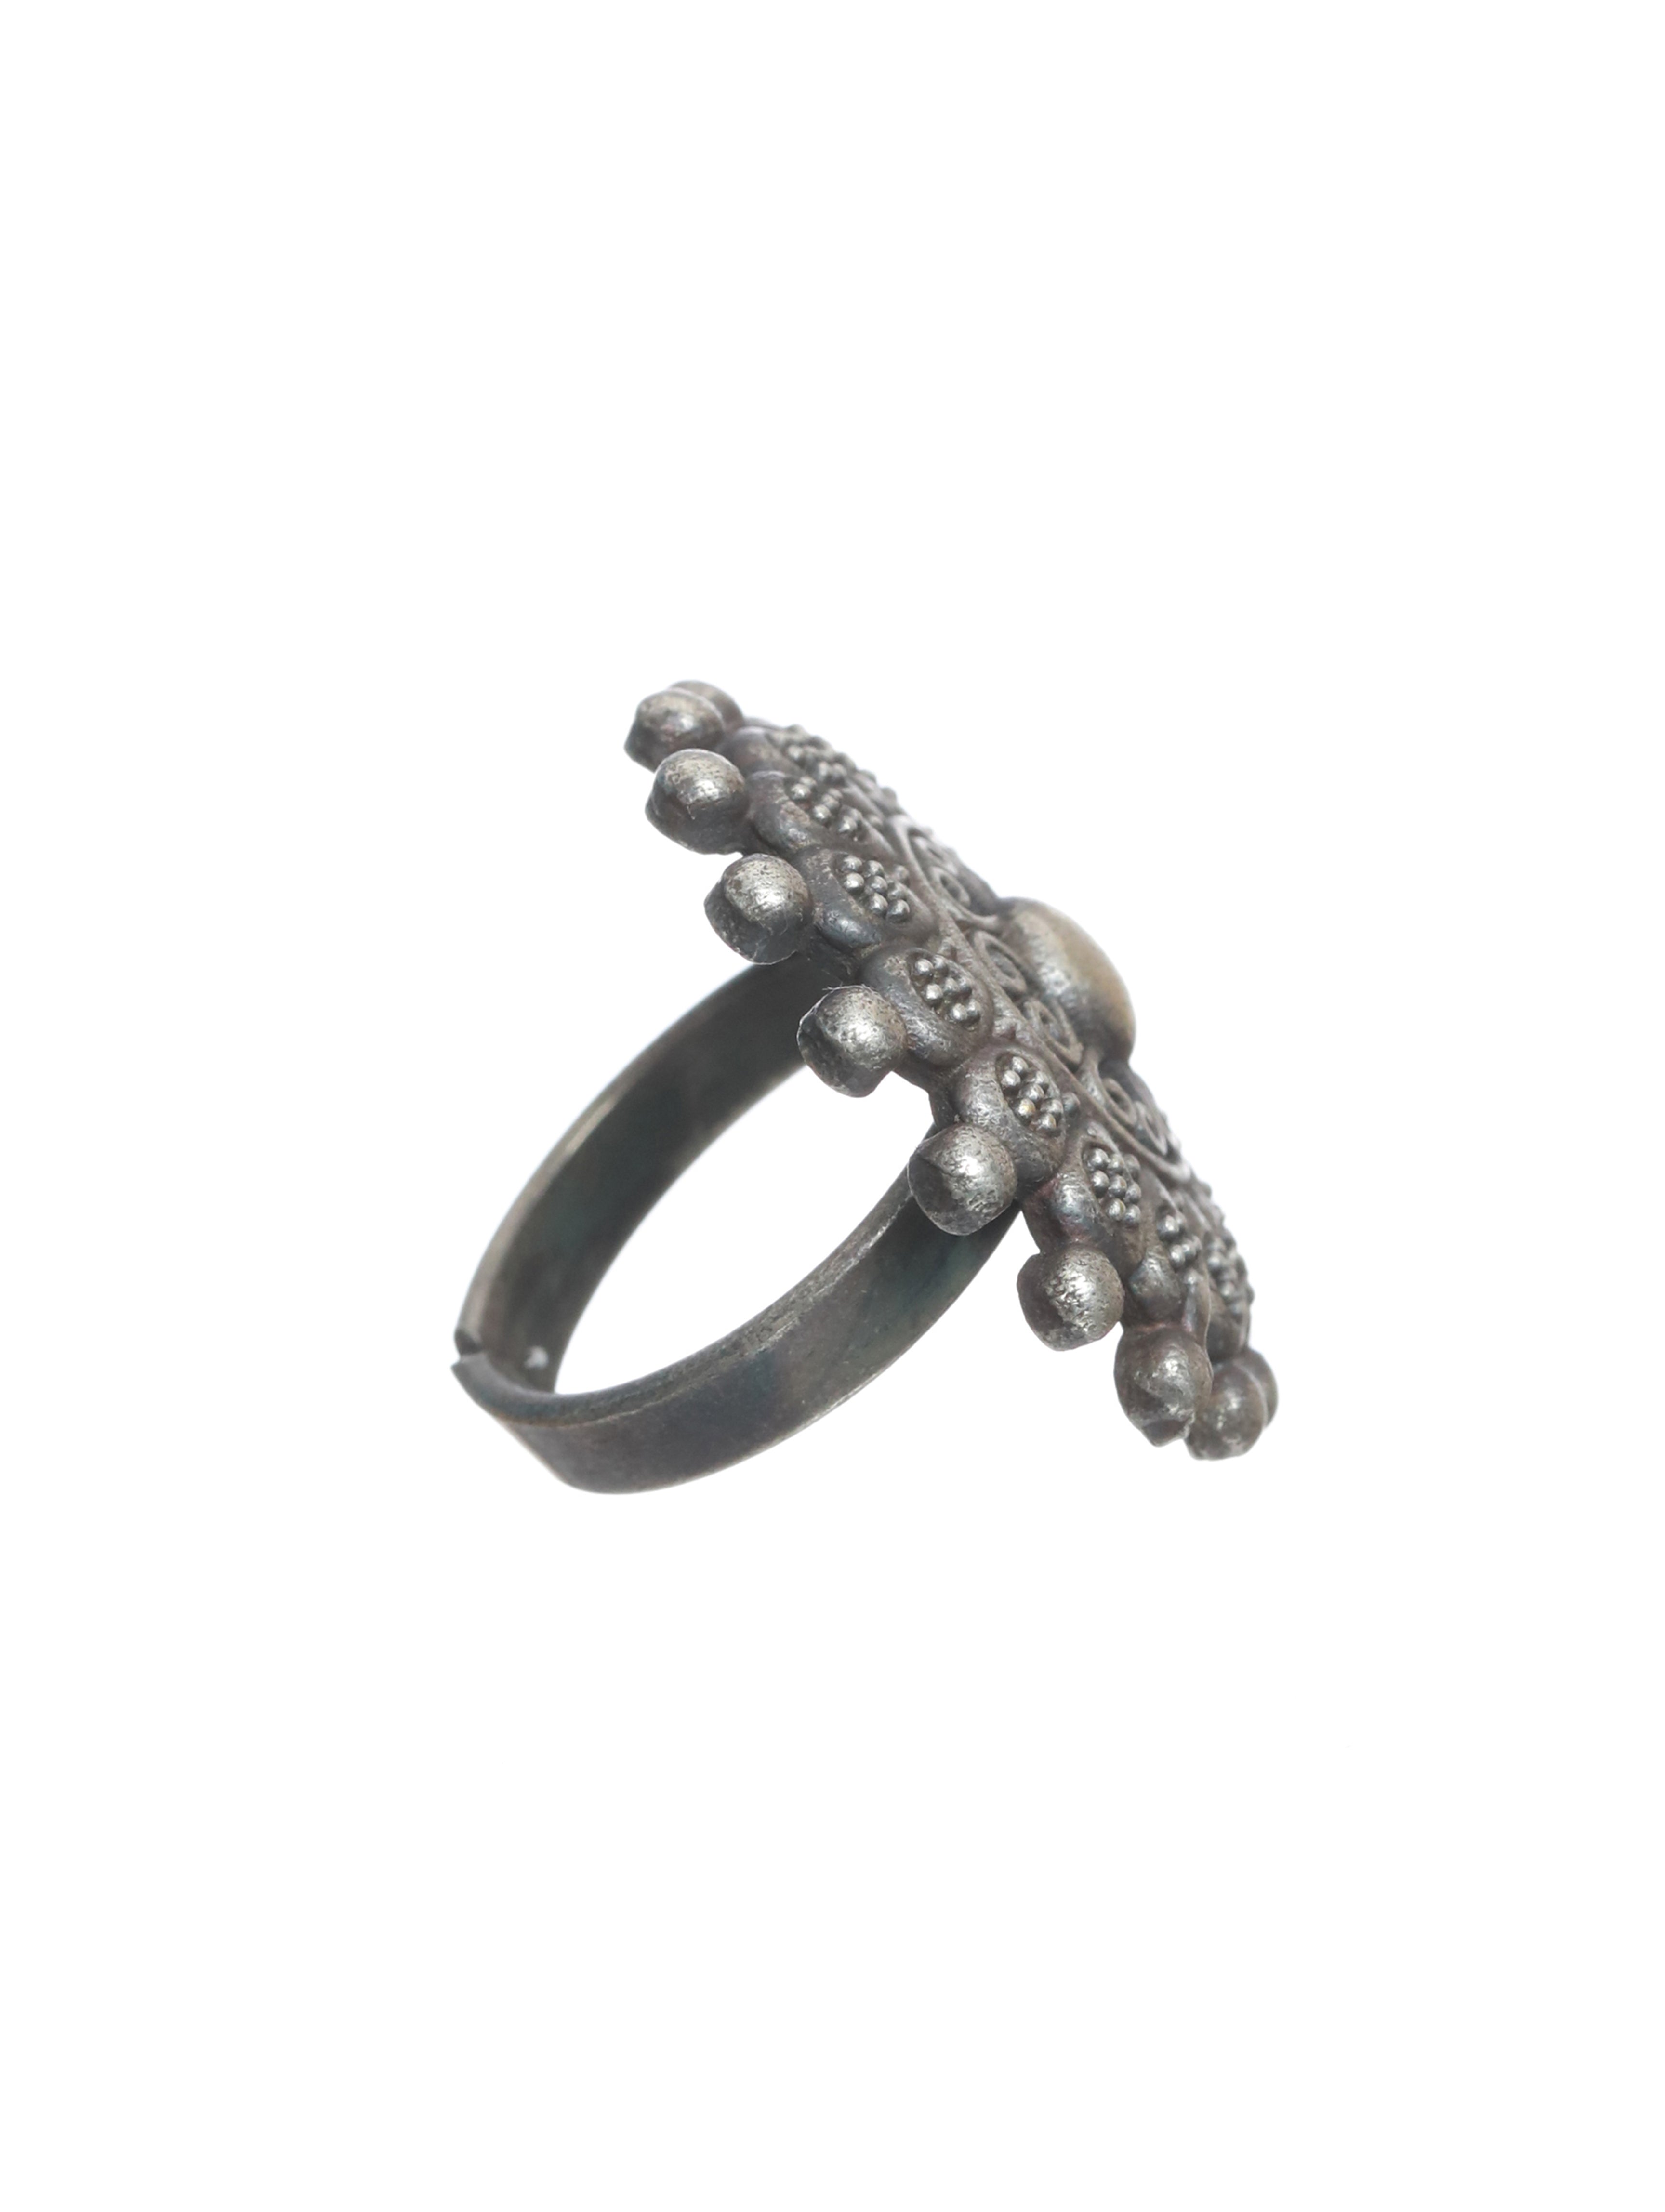 Oxidized Silver-Toned & Beaded Adjustable Finger Ring